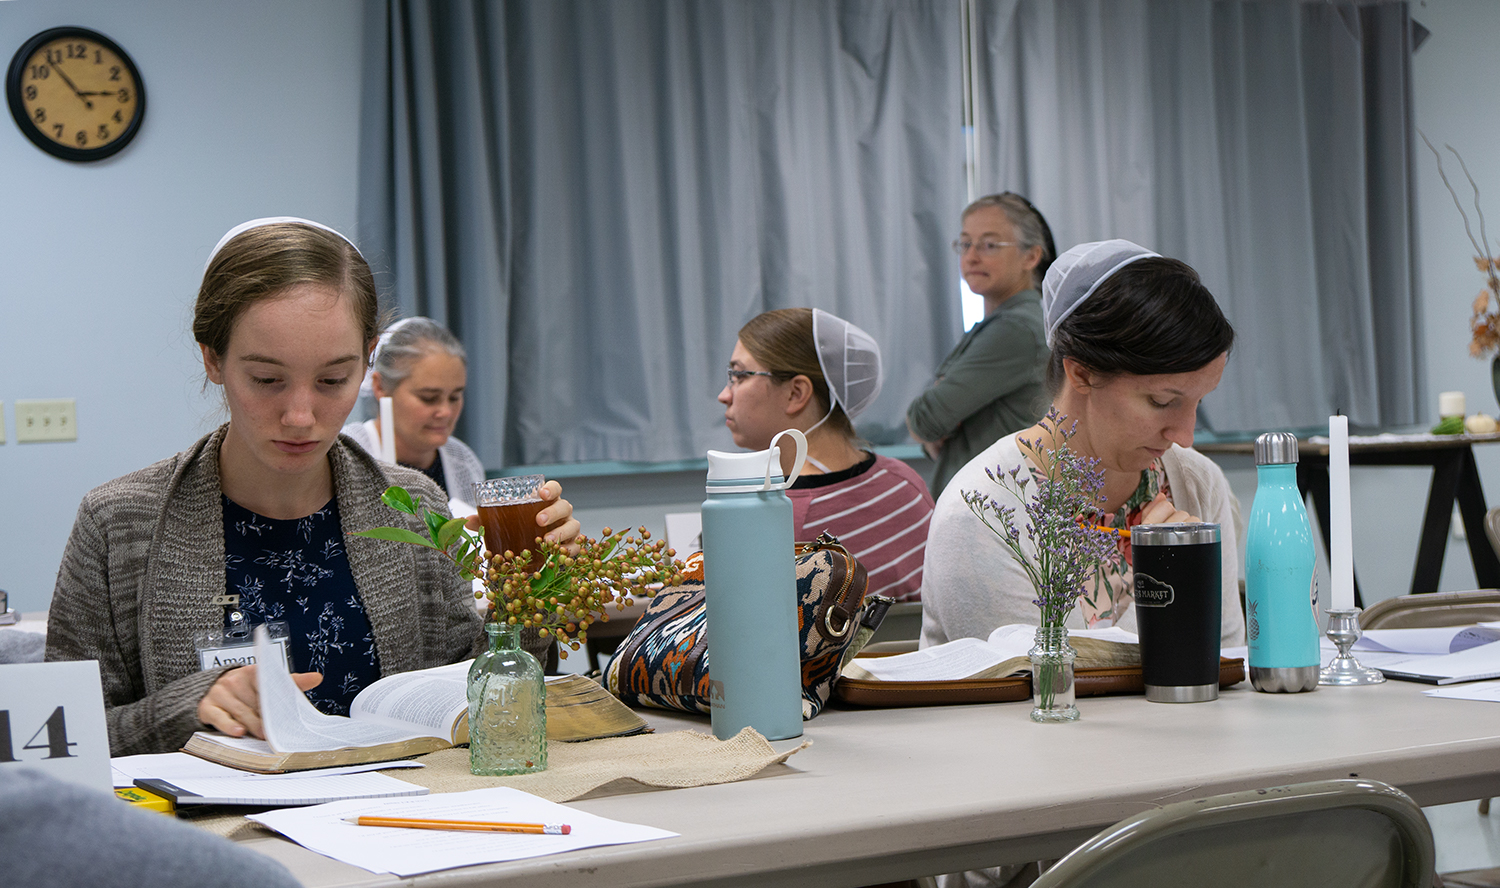 Mennonite women studying at a Bible Conference